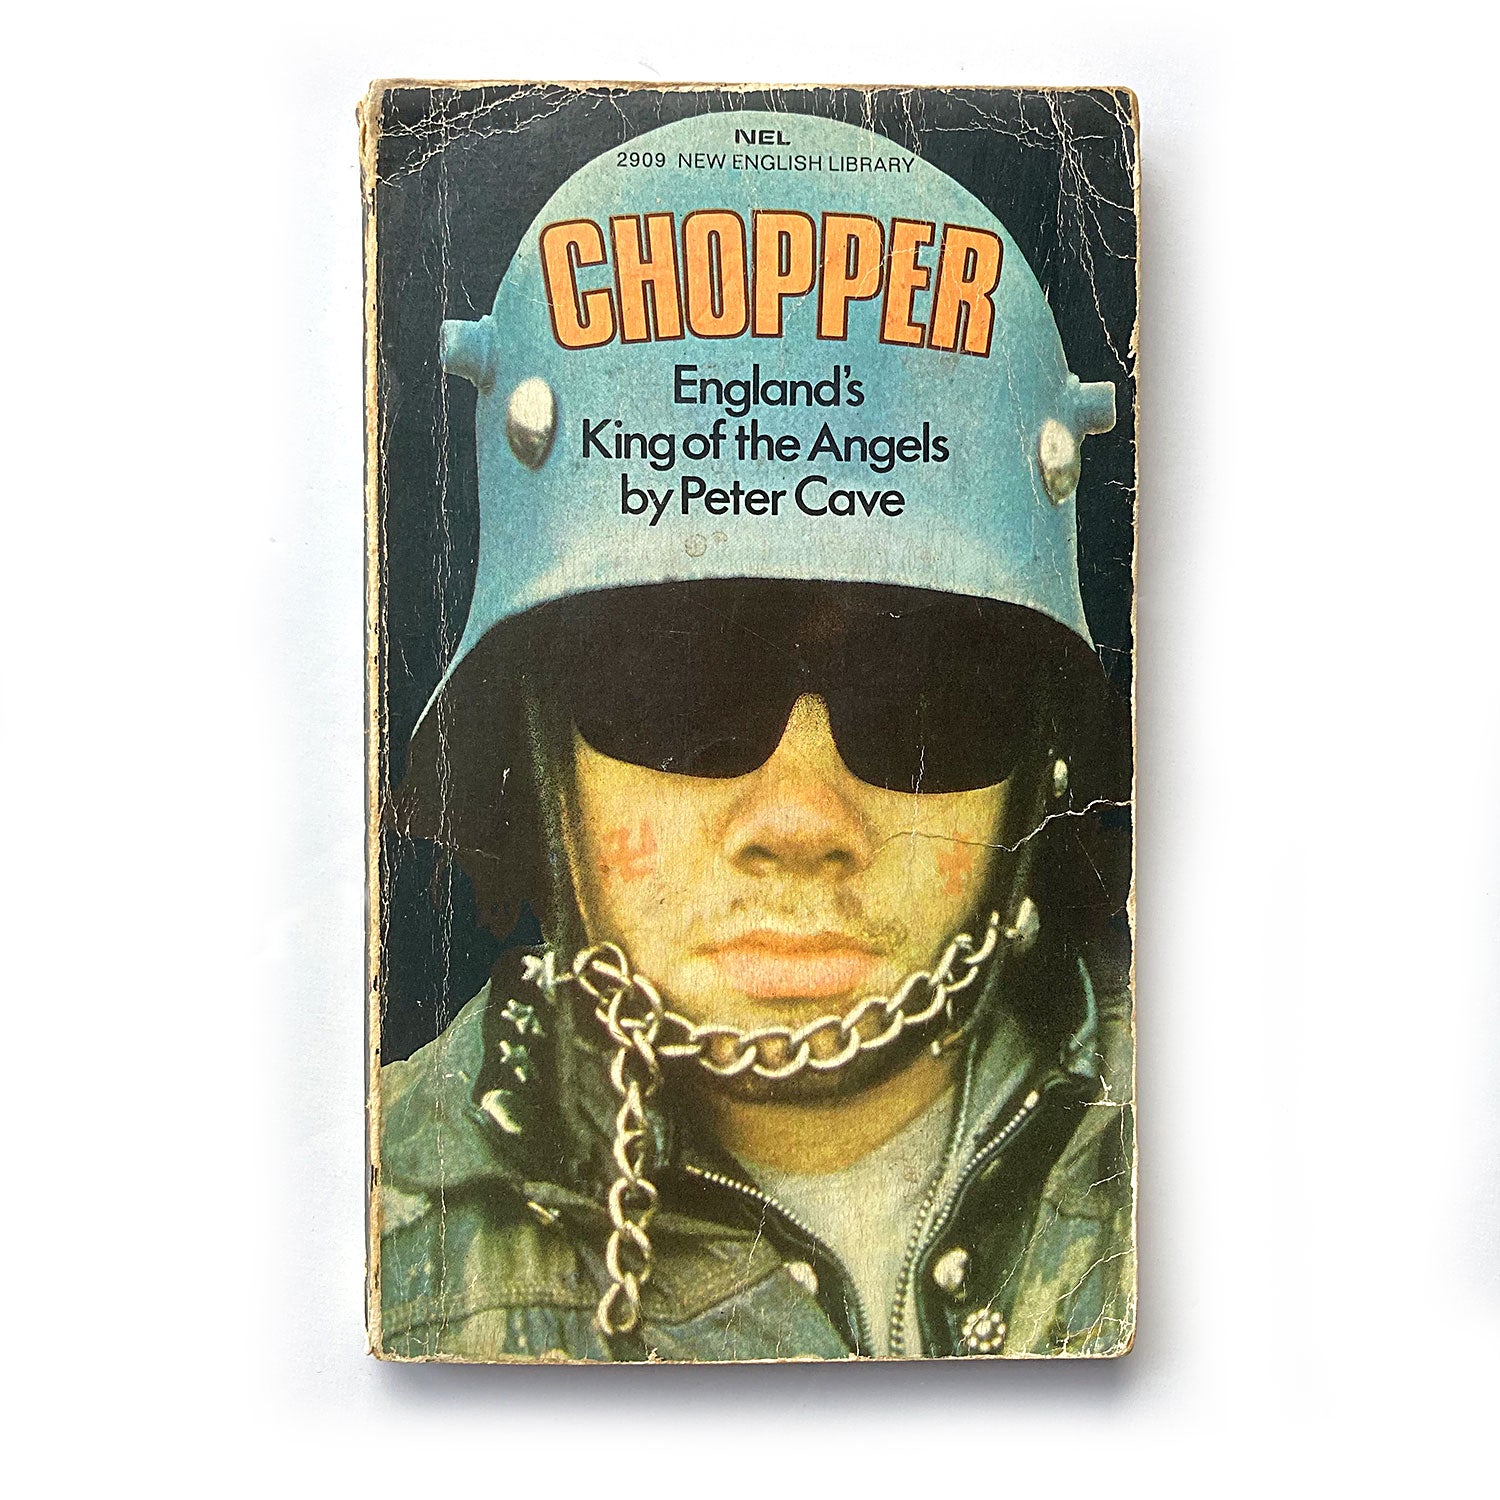 Chopper by Peter Cave, New English Library paperback, 1971